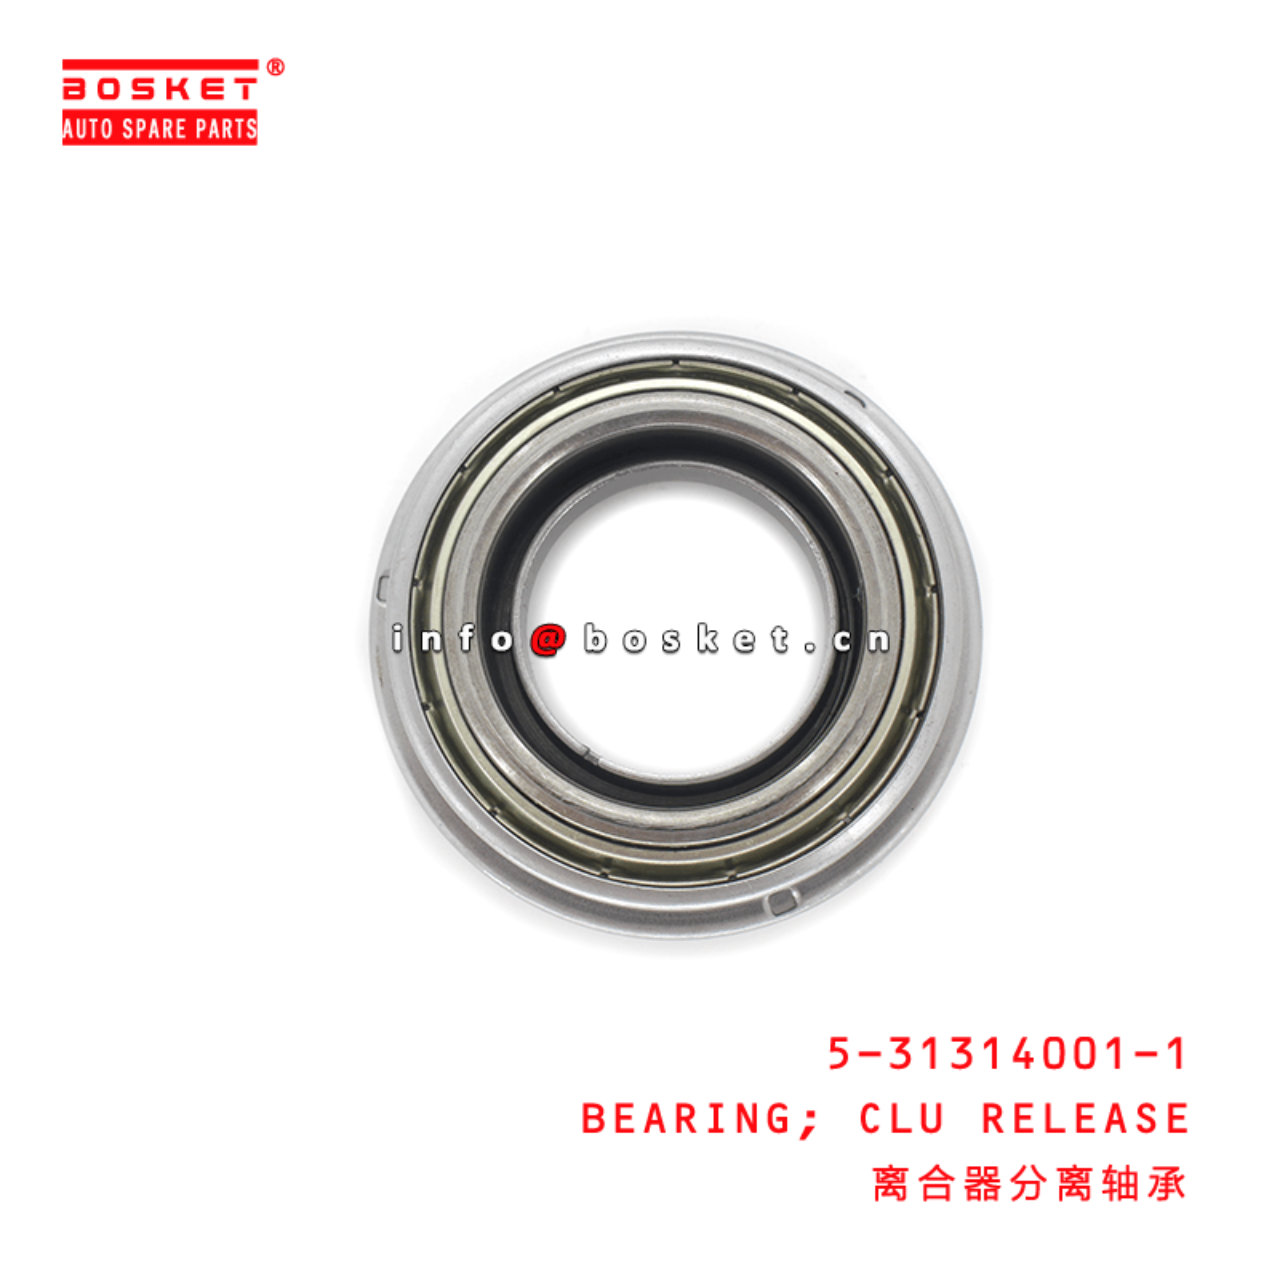 5-31314001-1 Clutch Release Bearing 5313140011 Suitable for ISUZU NKR 4JB1 